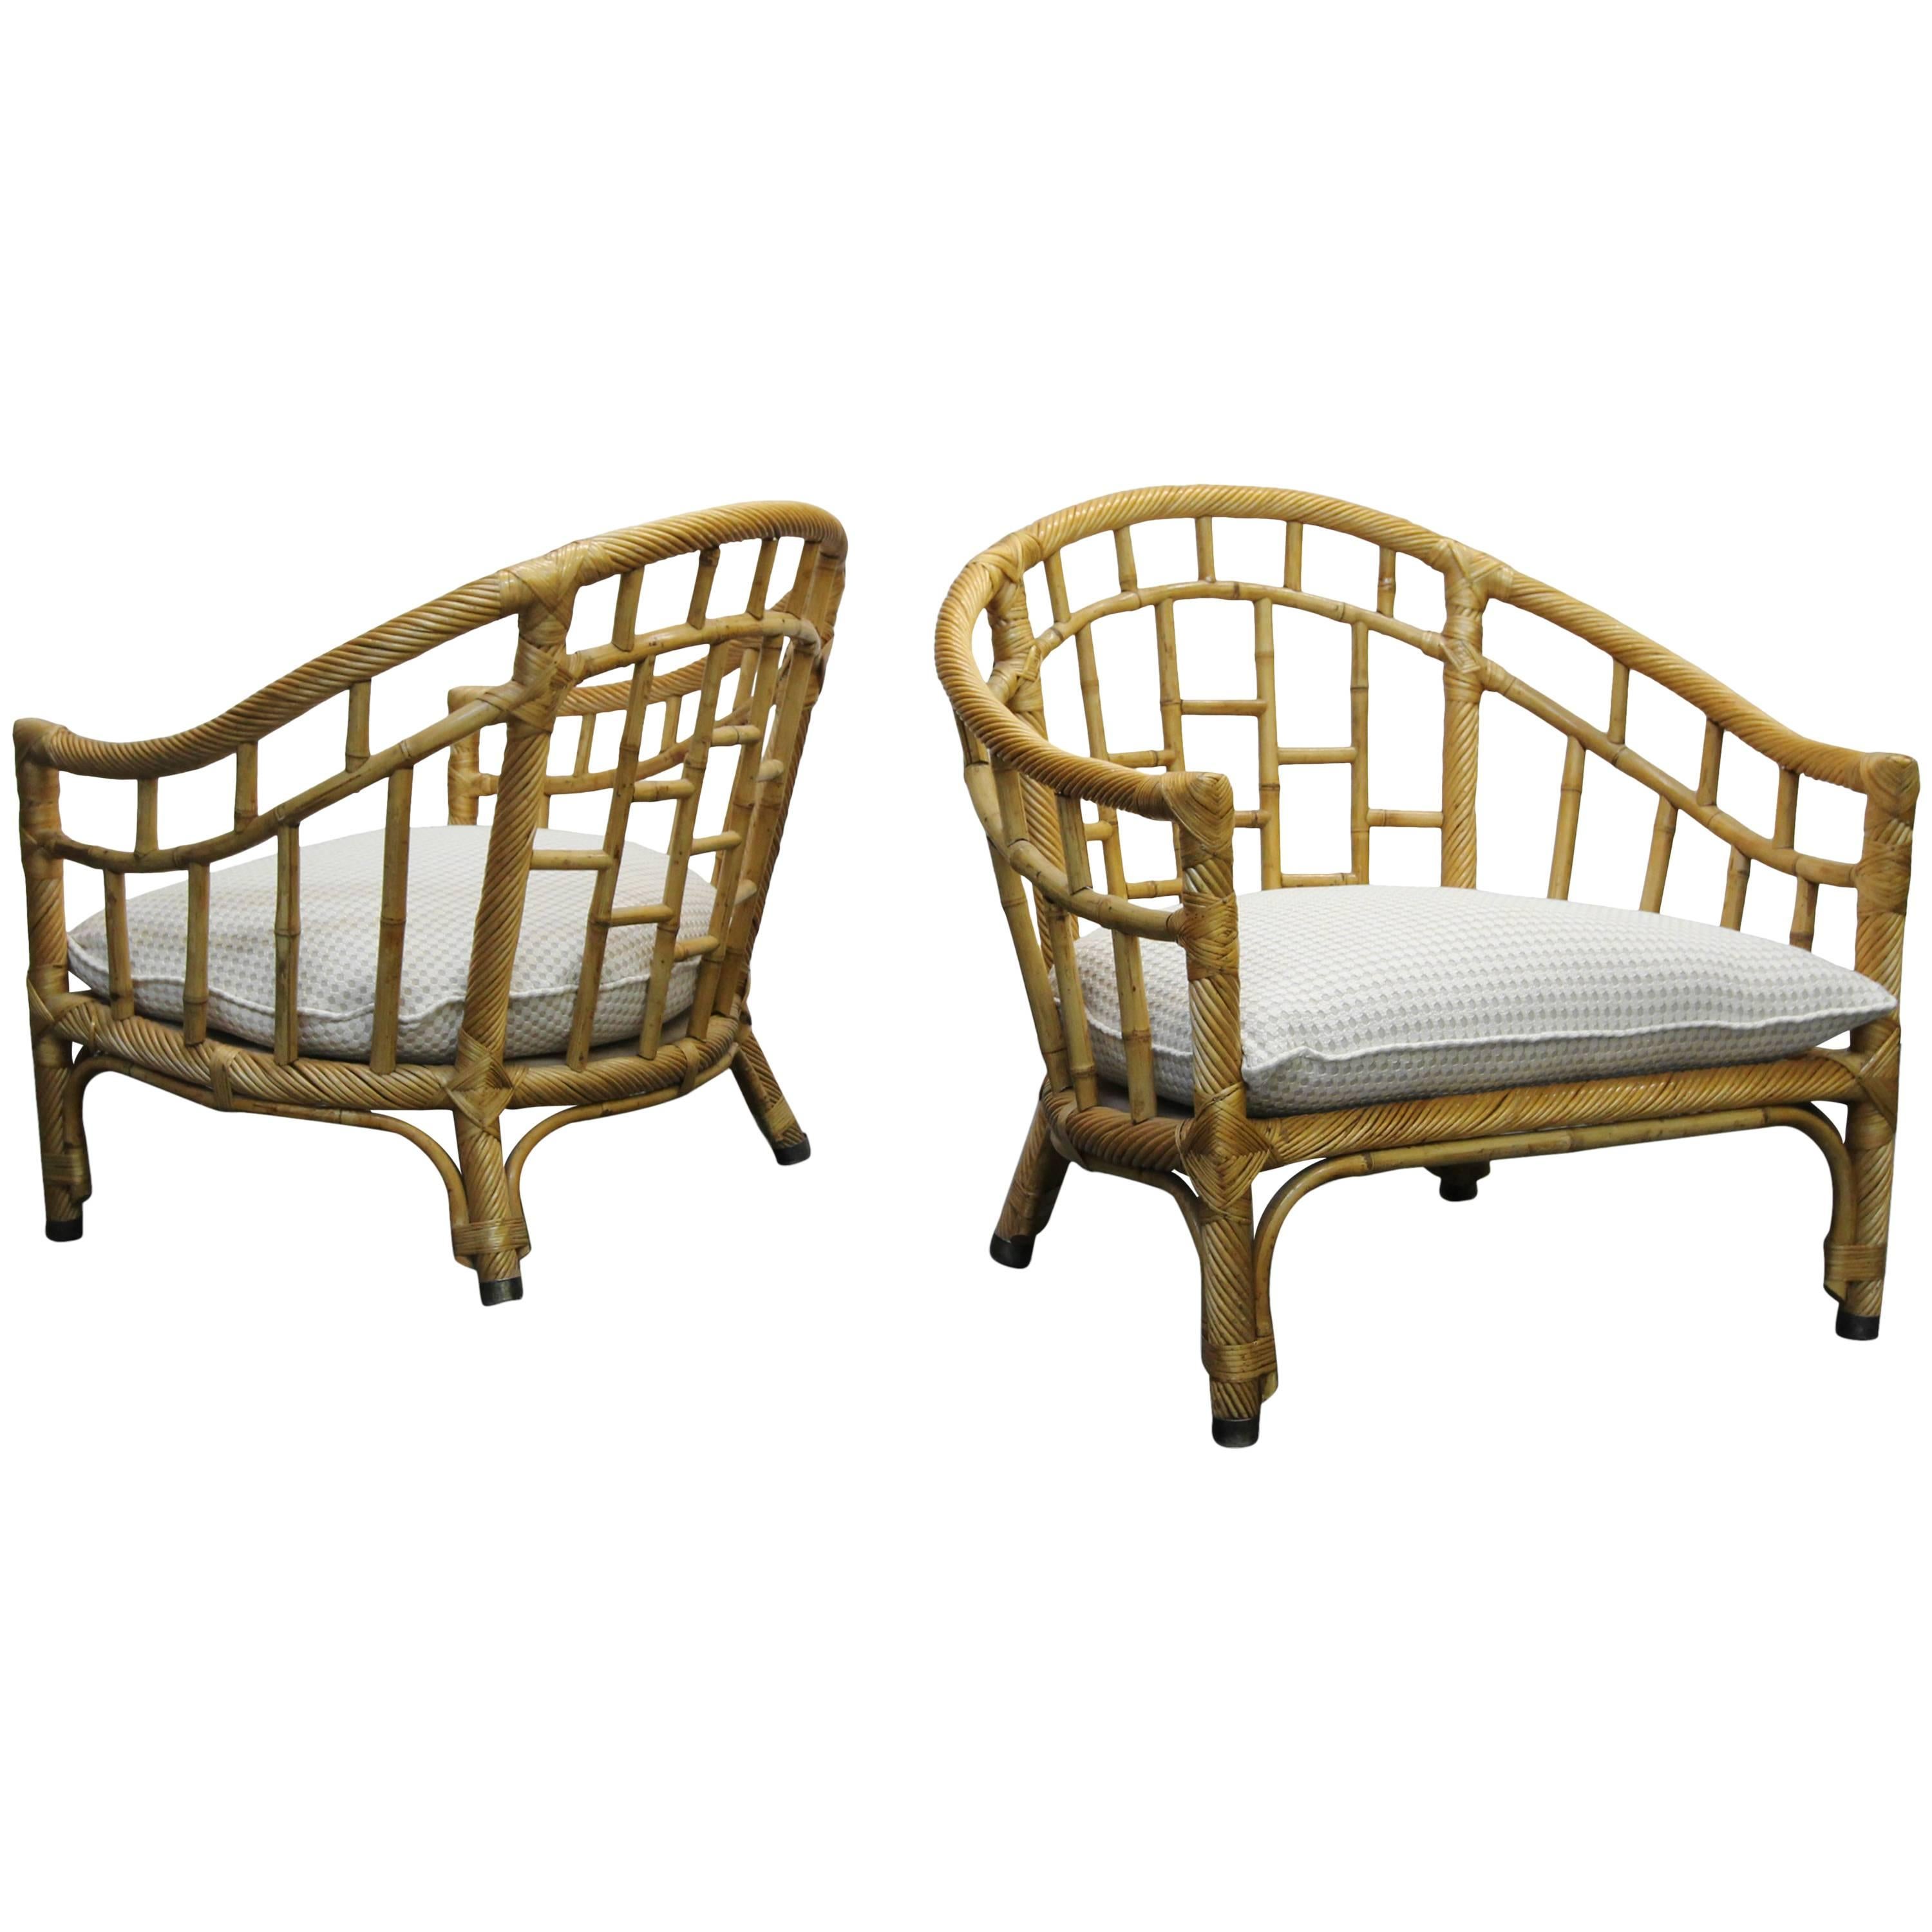 Pair of Oversized Barrel Back Bamboo and Rattan Chairs by Ficks Reed